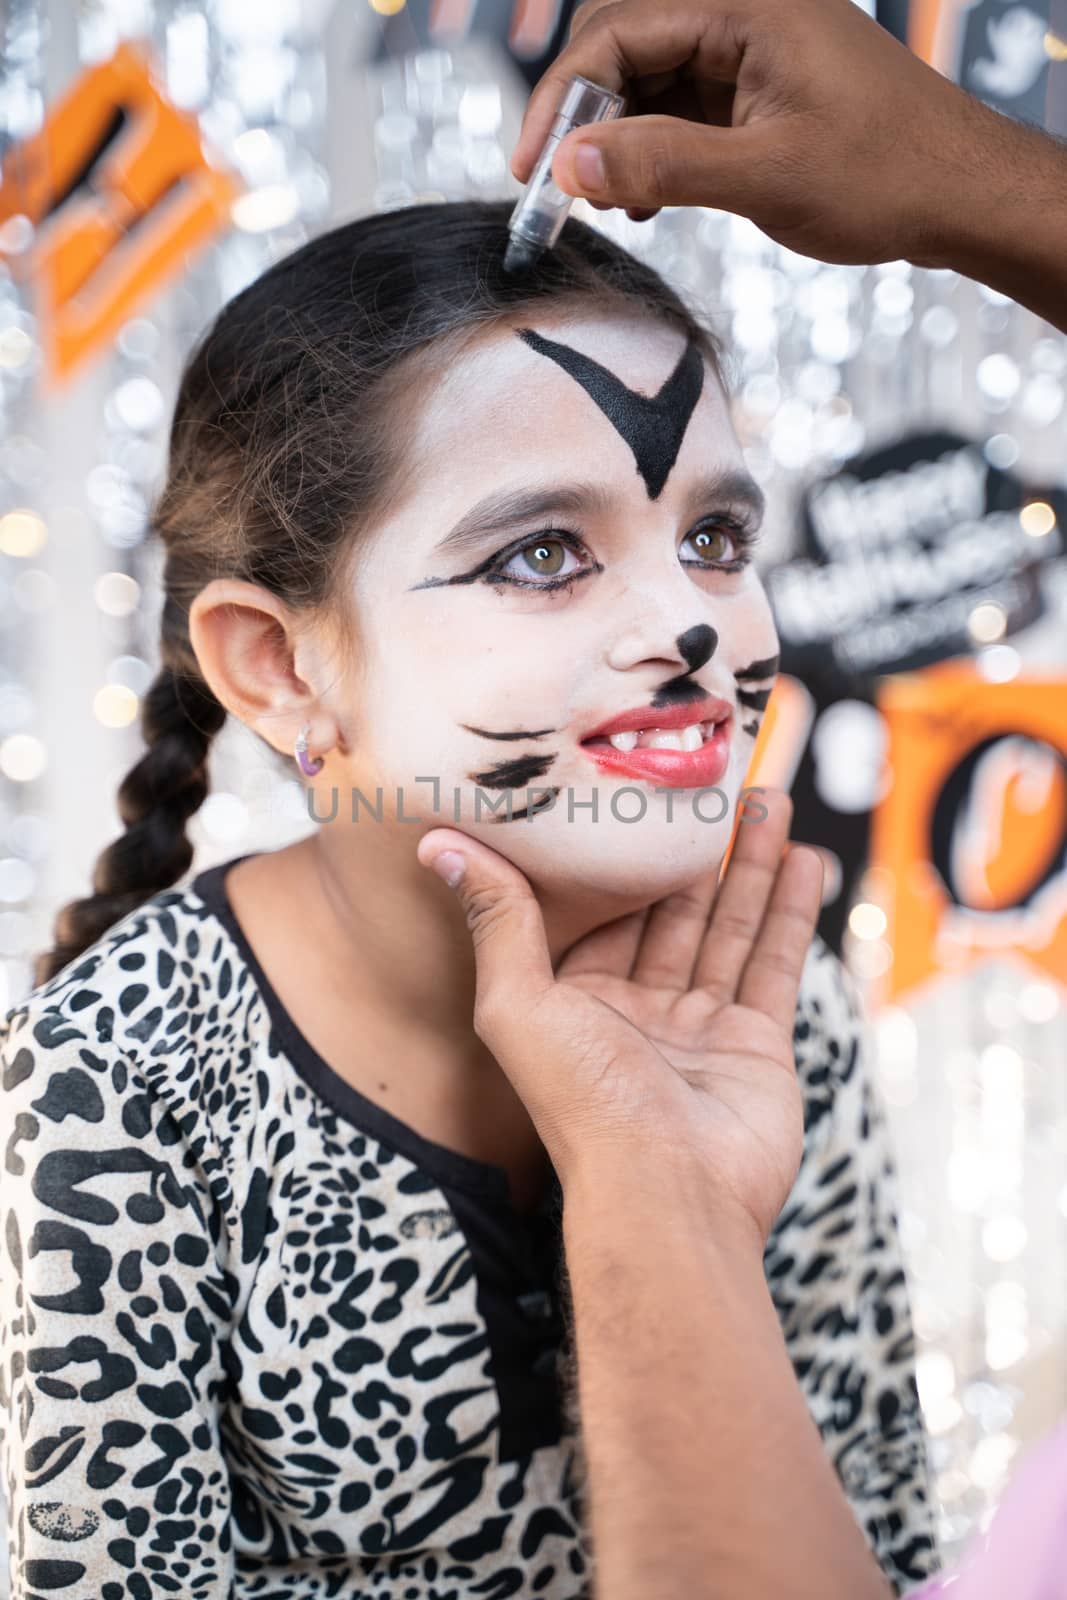 Parent helping her daughter to get ready for Halloween by doing make-up - concept of Halloween, holiday and childhood festival celebration and preparation